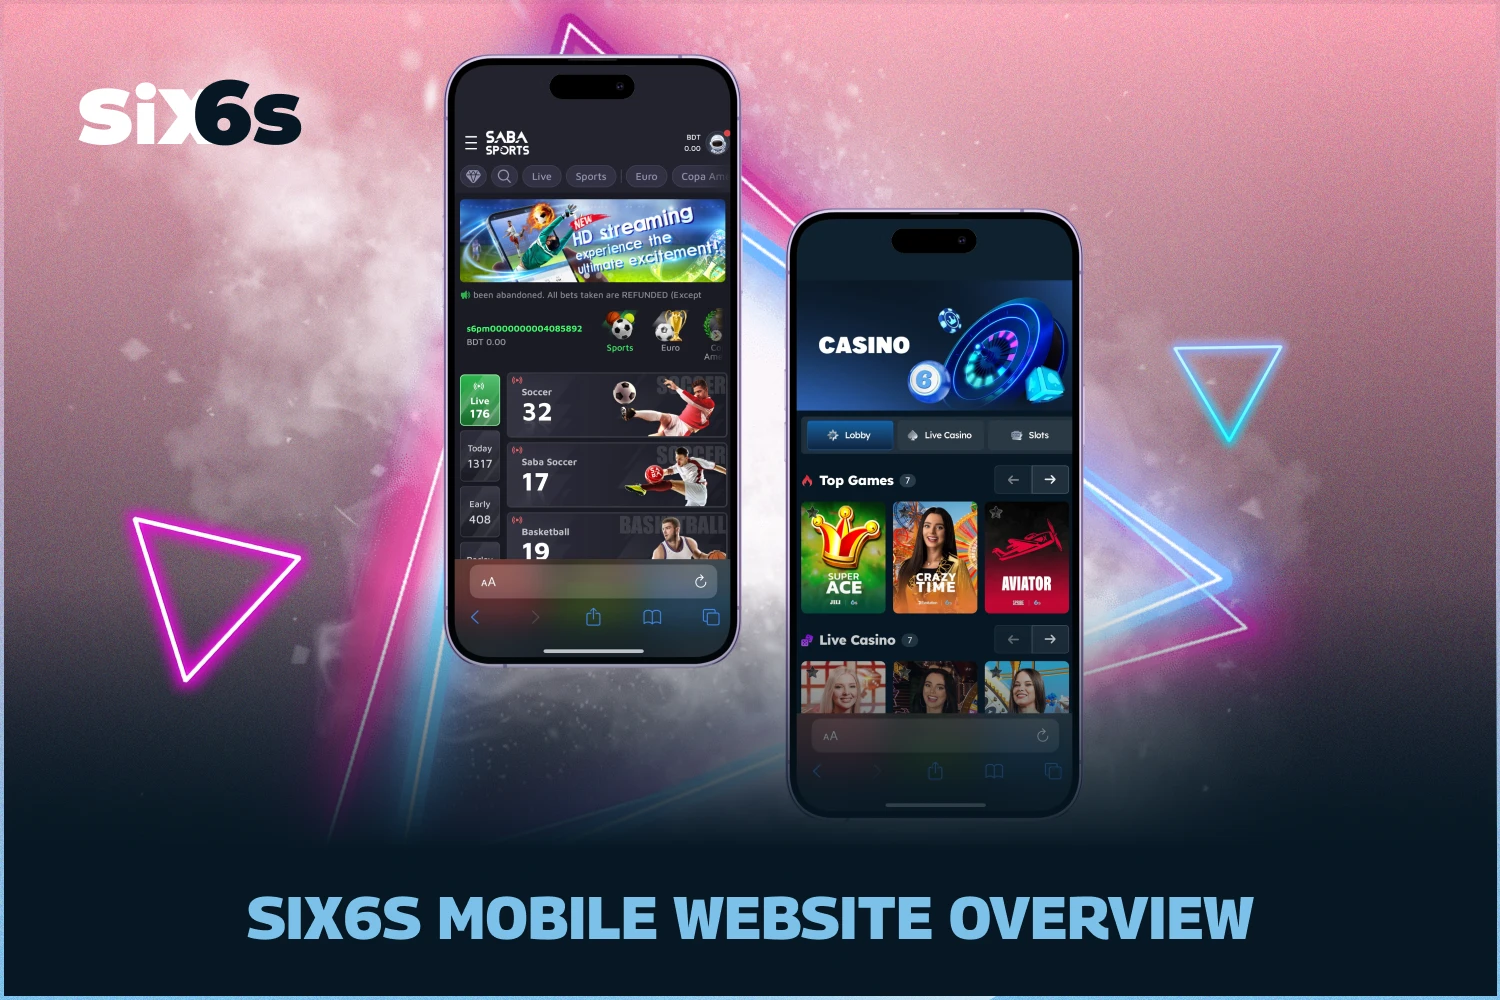 Players from Bangladesh can download the Six6s app or can use the mobile site